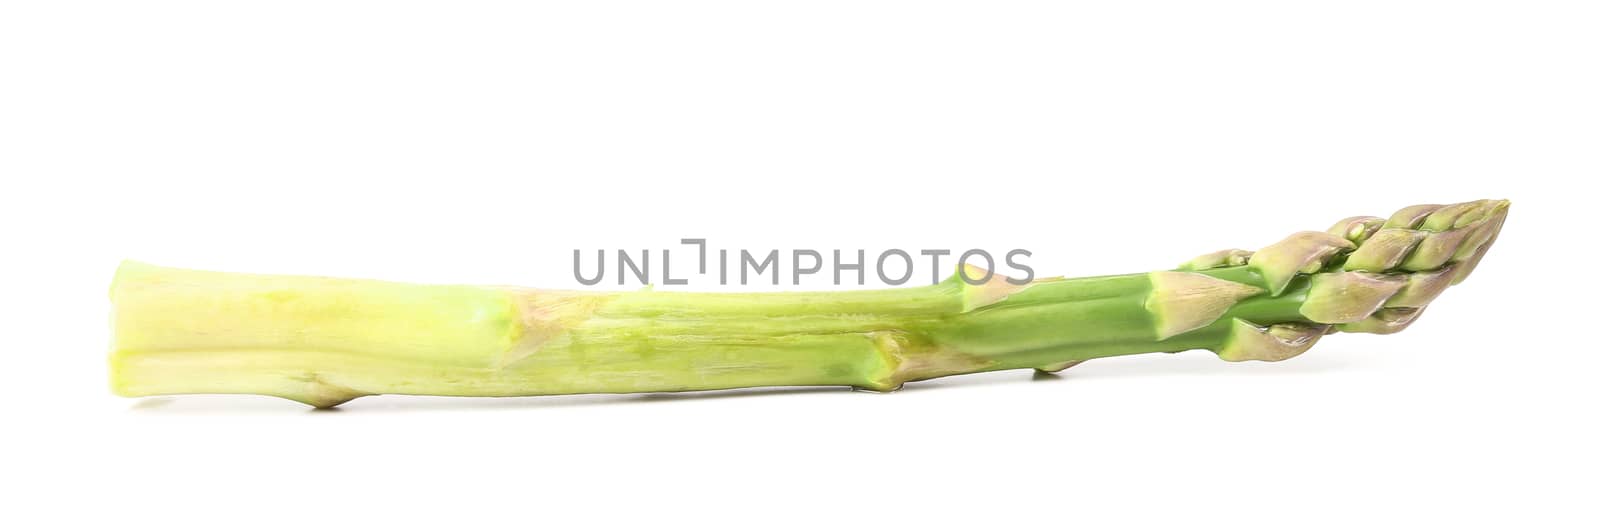 Fresh asparagus spear. Isolated on a white background.